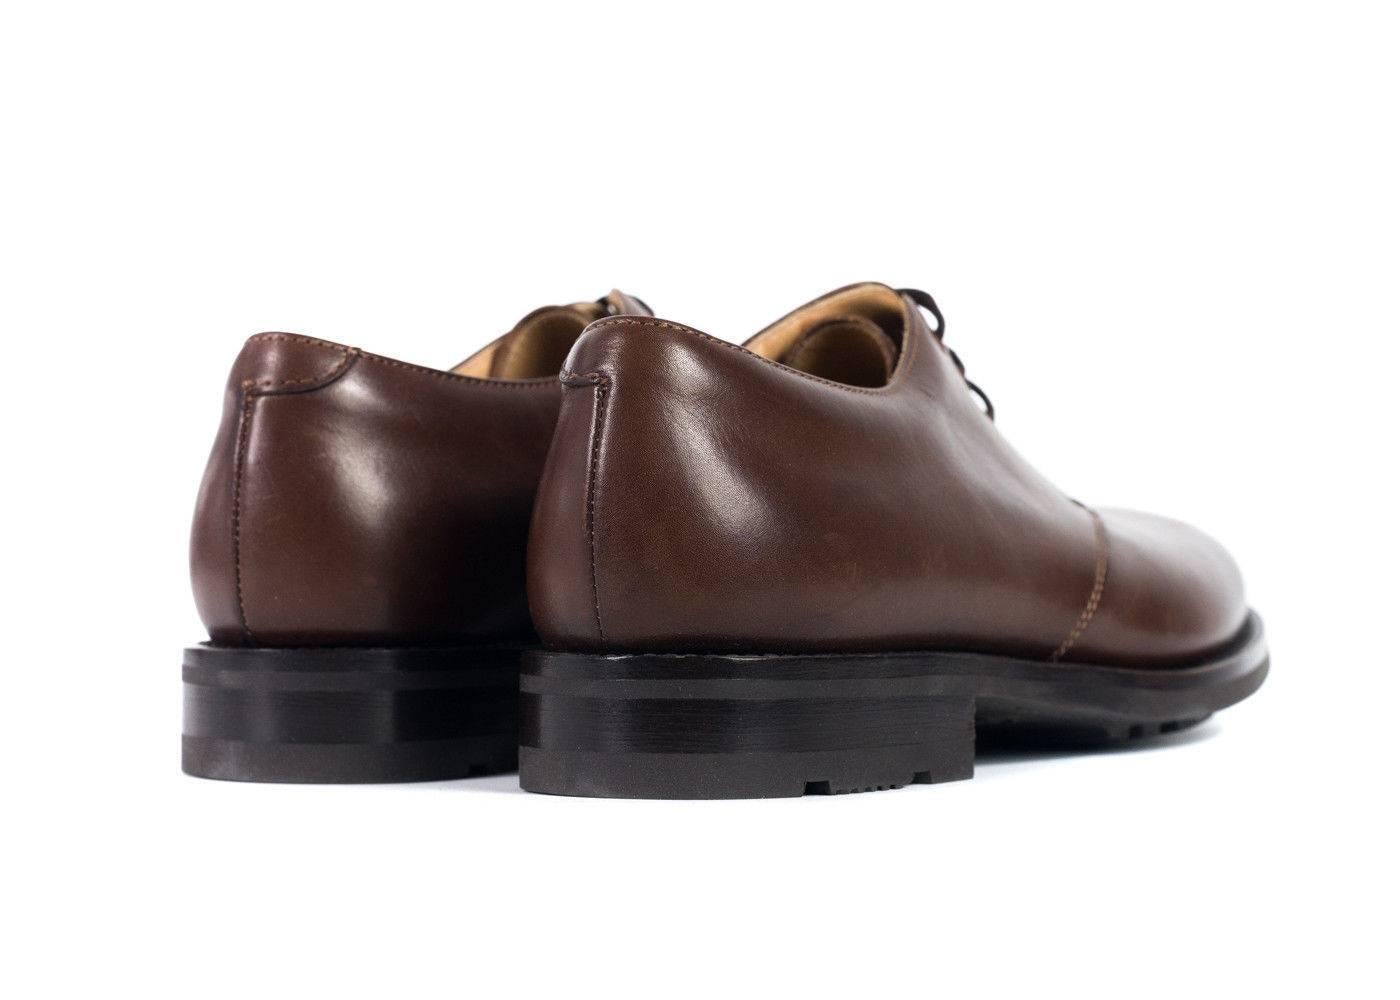 Church's lace up shoes in a gorgeous brown leather. These lace up shoes are perfect for professional occasions or worn as a trendy casual look. Pair it with a pair of culottes or black jeans with a striped button down or feminine blouse for a chic